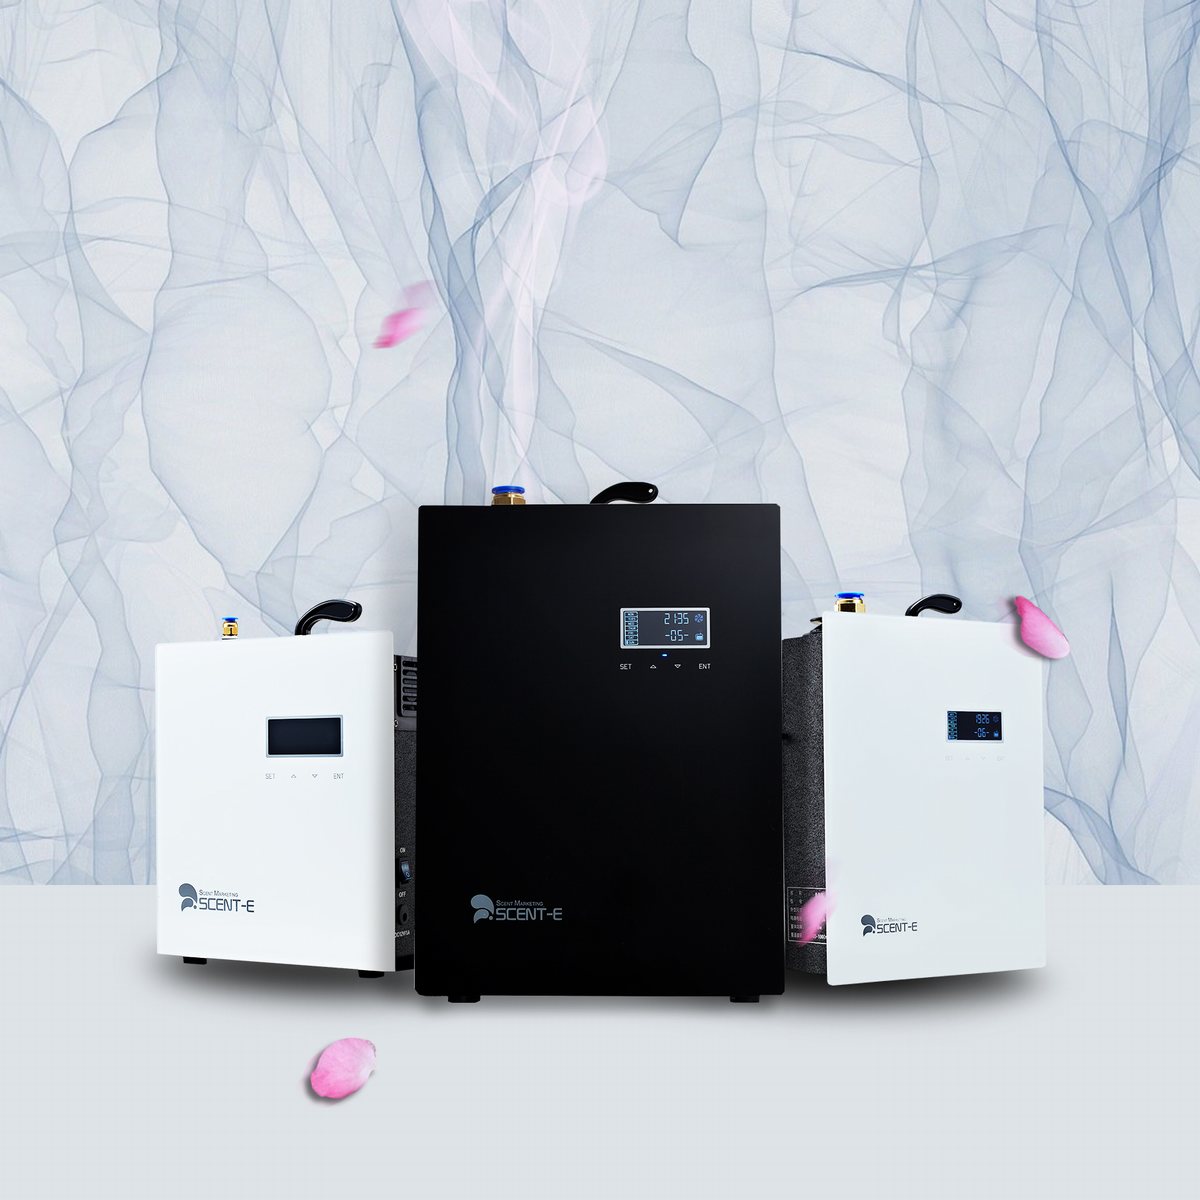 Optimize our sales performance with SCENT-E smart scent machine